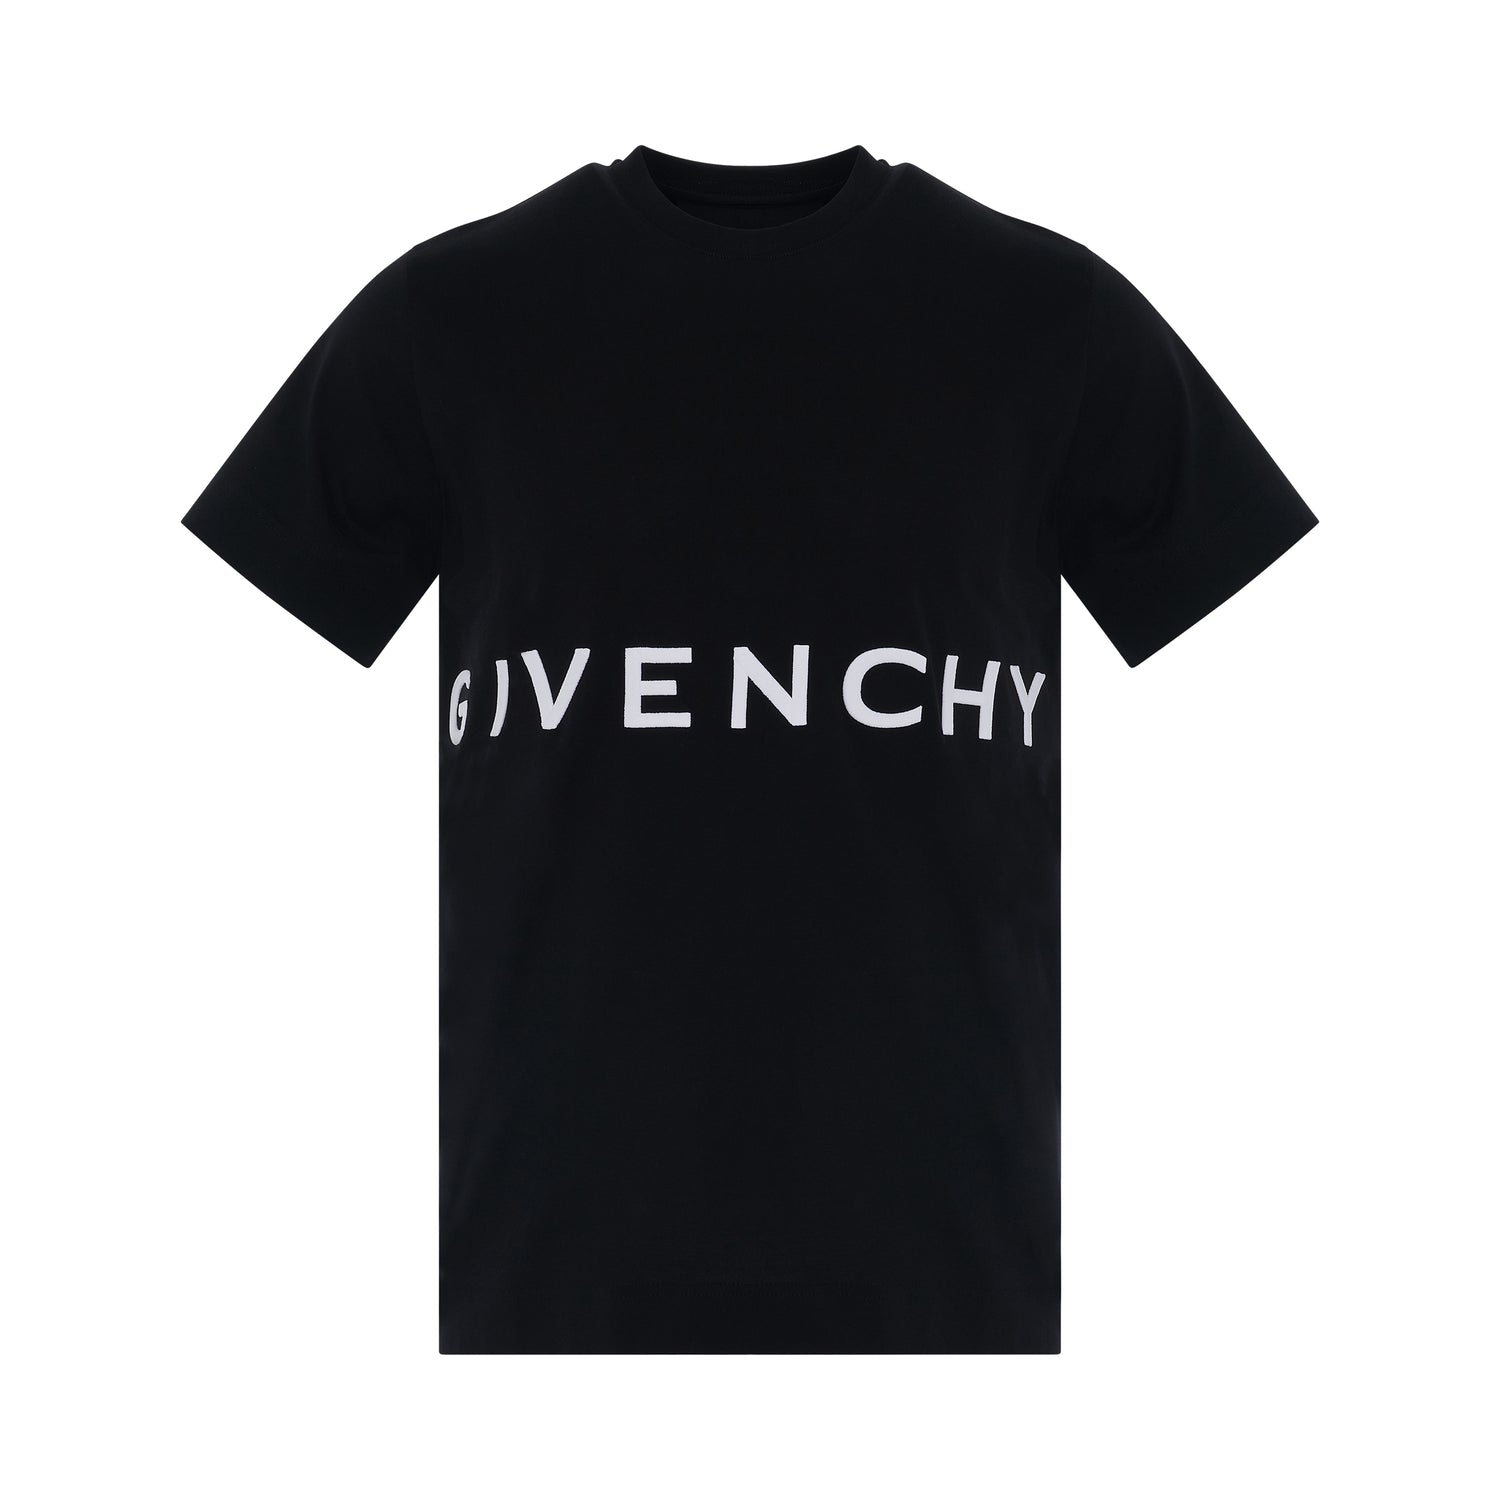 Givenchy Sale - Men Clothing